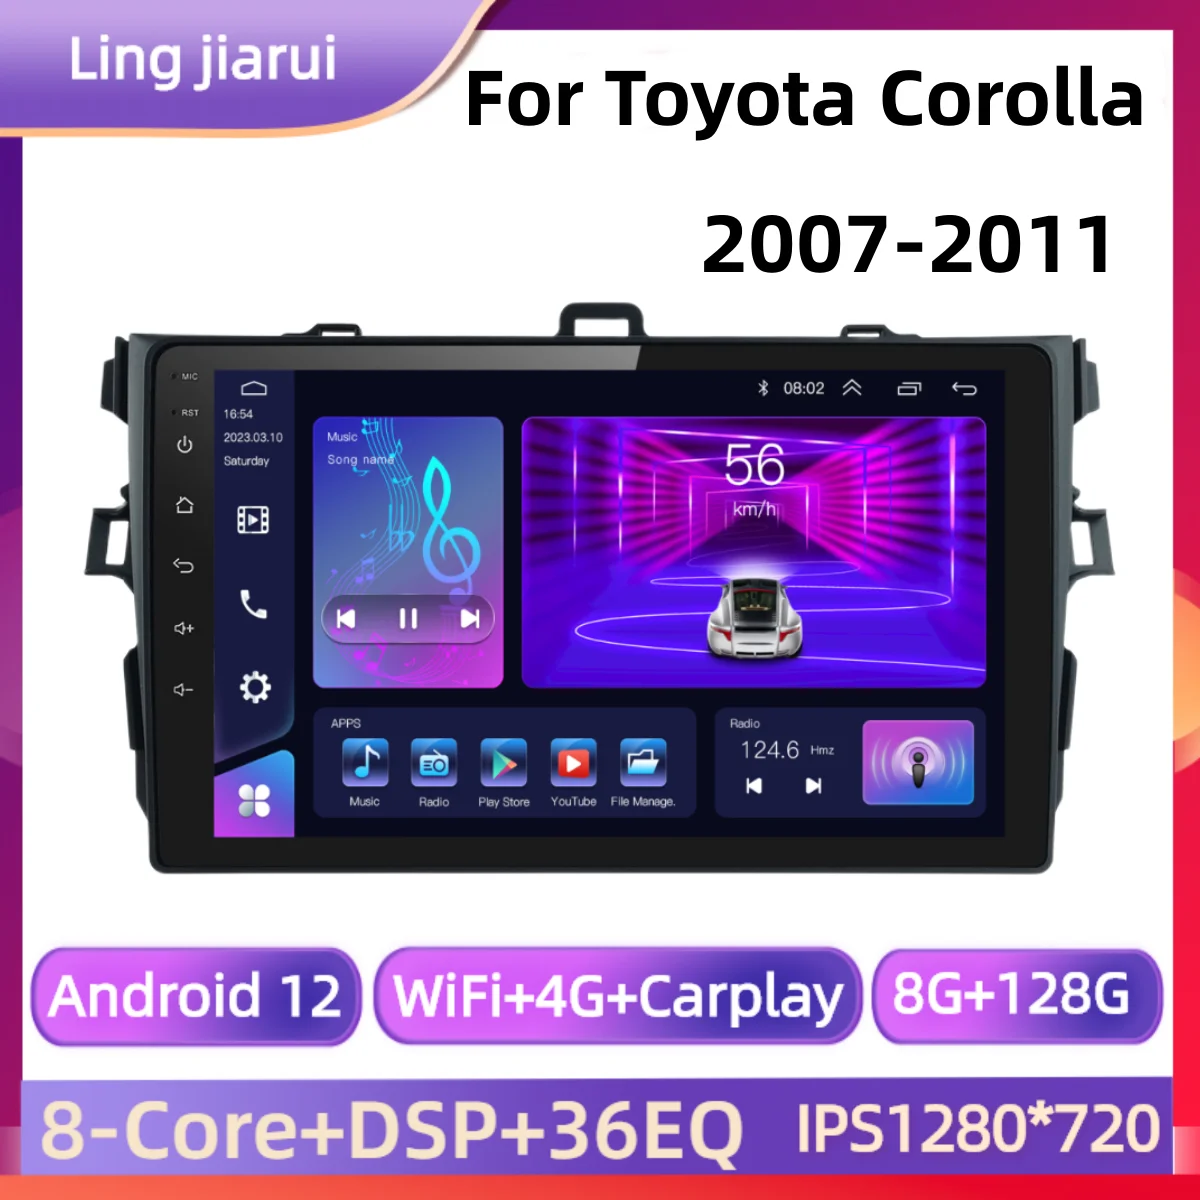 

9" Android Car Stereo Radio for Toyota Corolla E140/150 2007 2008 2009 2010 2011 2012 2013 Multimedia Player 2 Din DVD Speakers